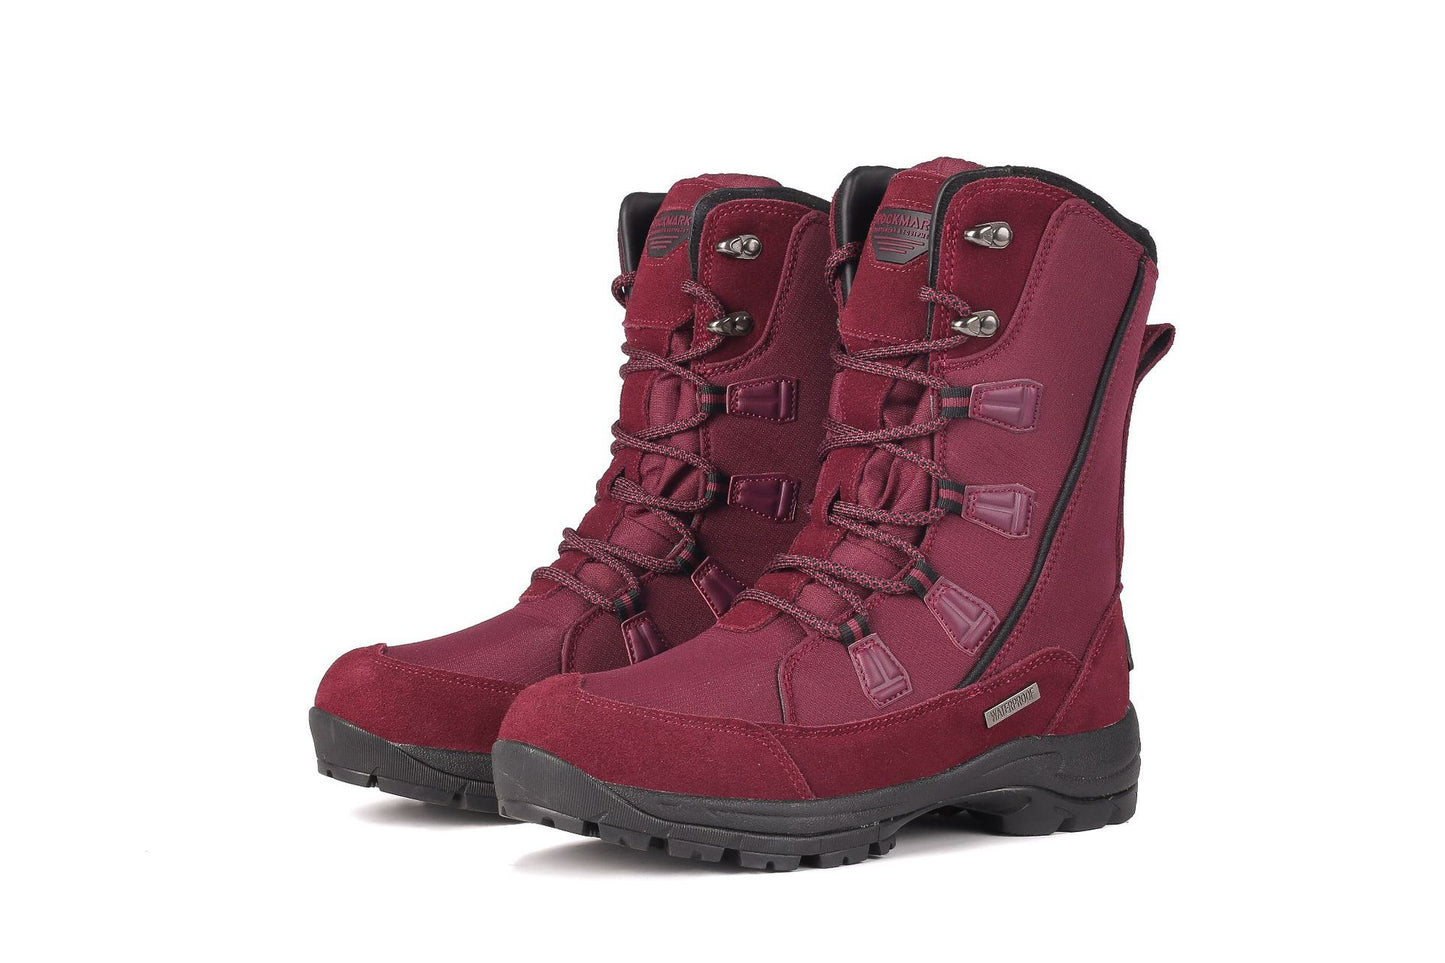 Women's Outdoor Mid-calf Length Thermal Snow Boots